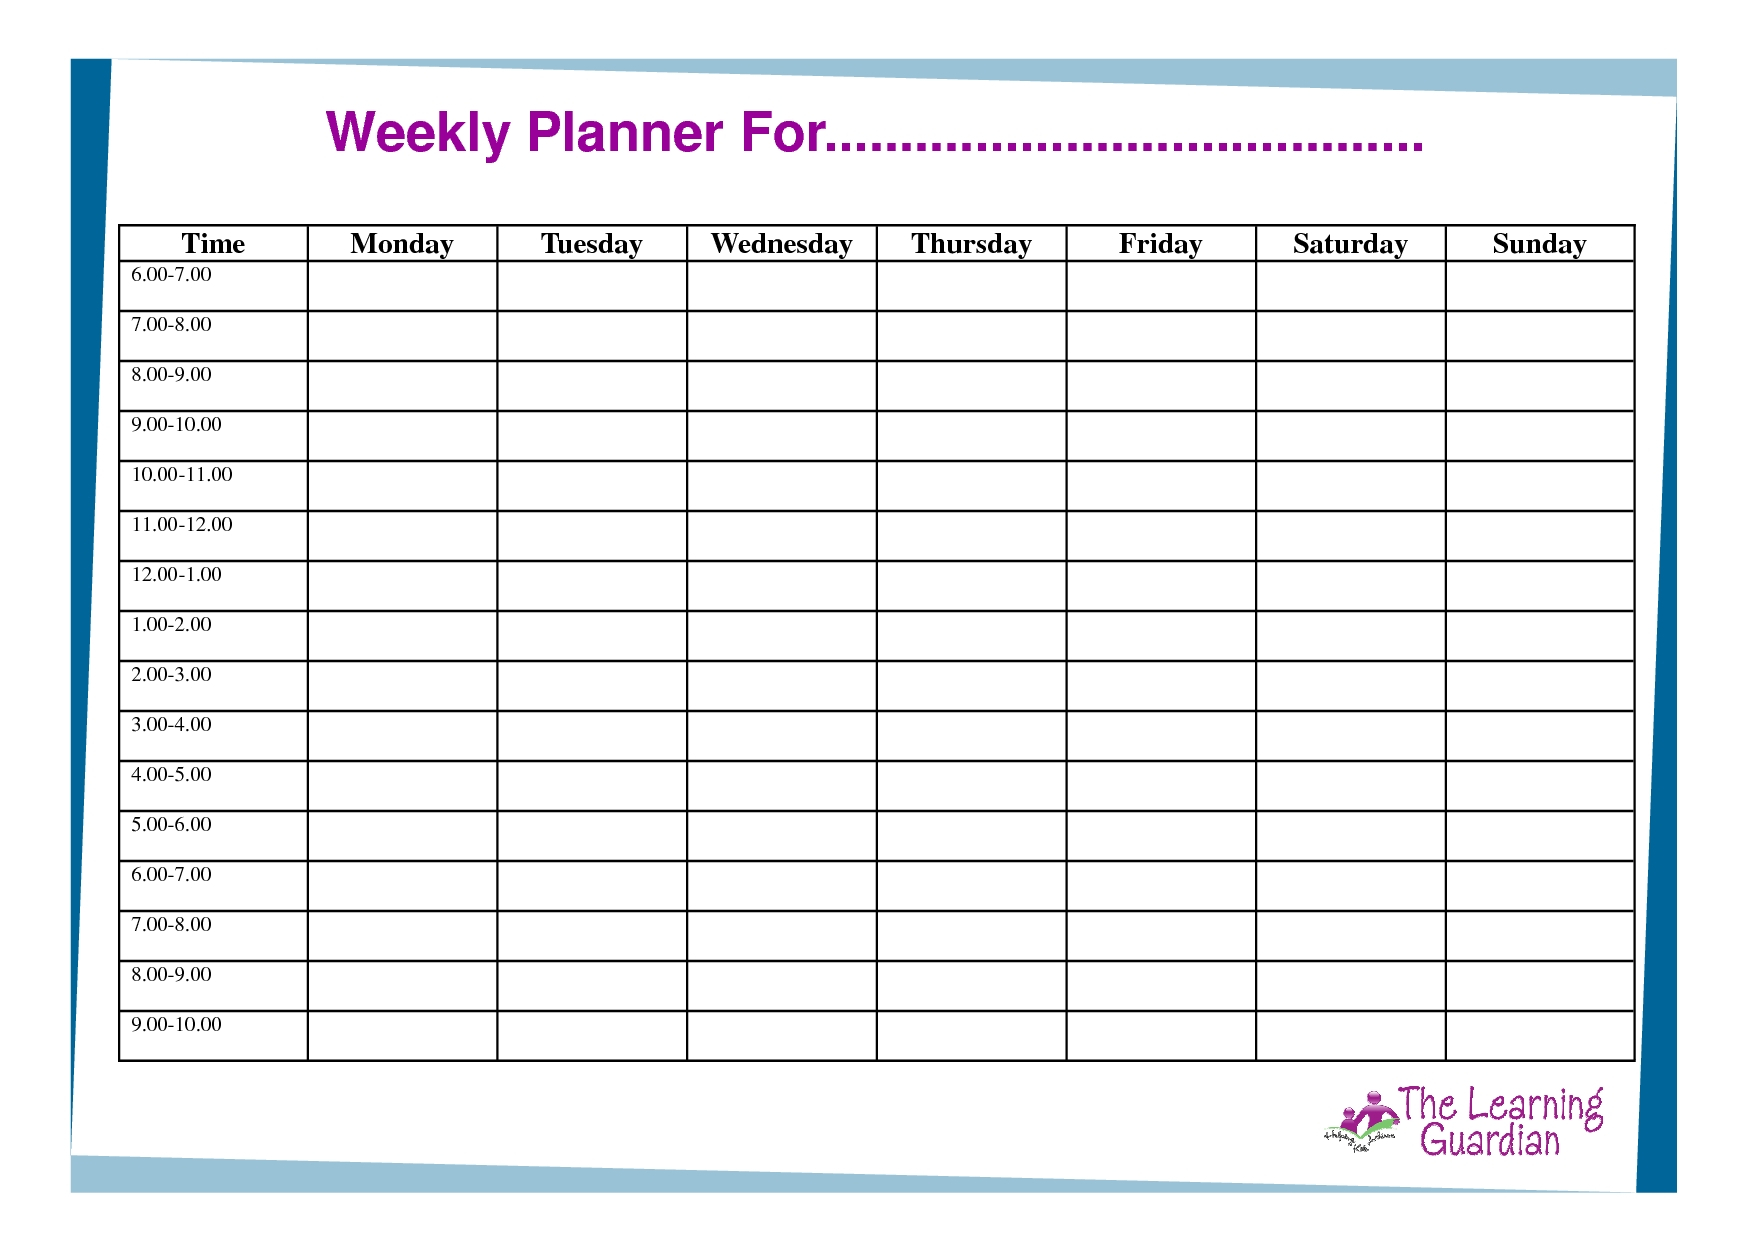 Online Daily Time Slot Planner  Template Calendar Design in Printable Daily Calendar With Time Slots